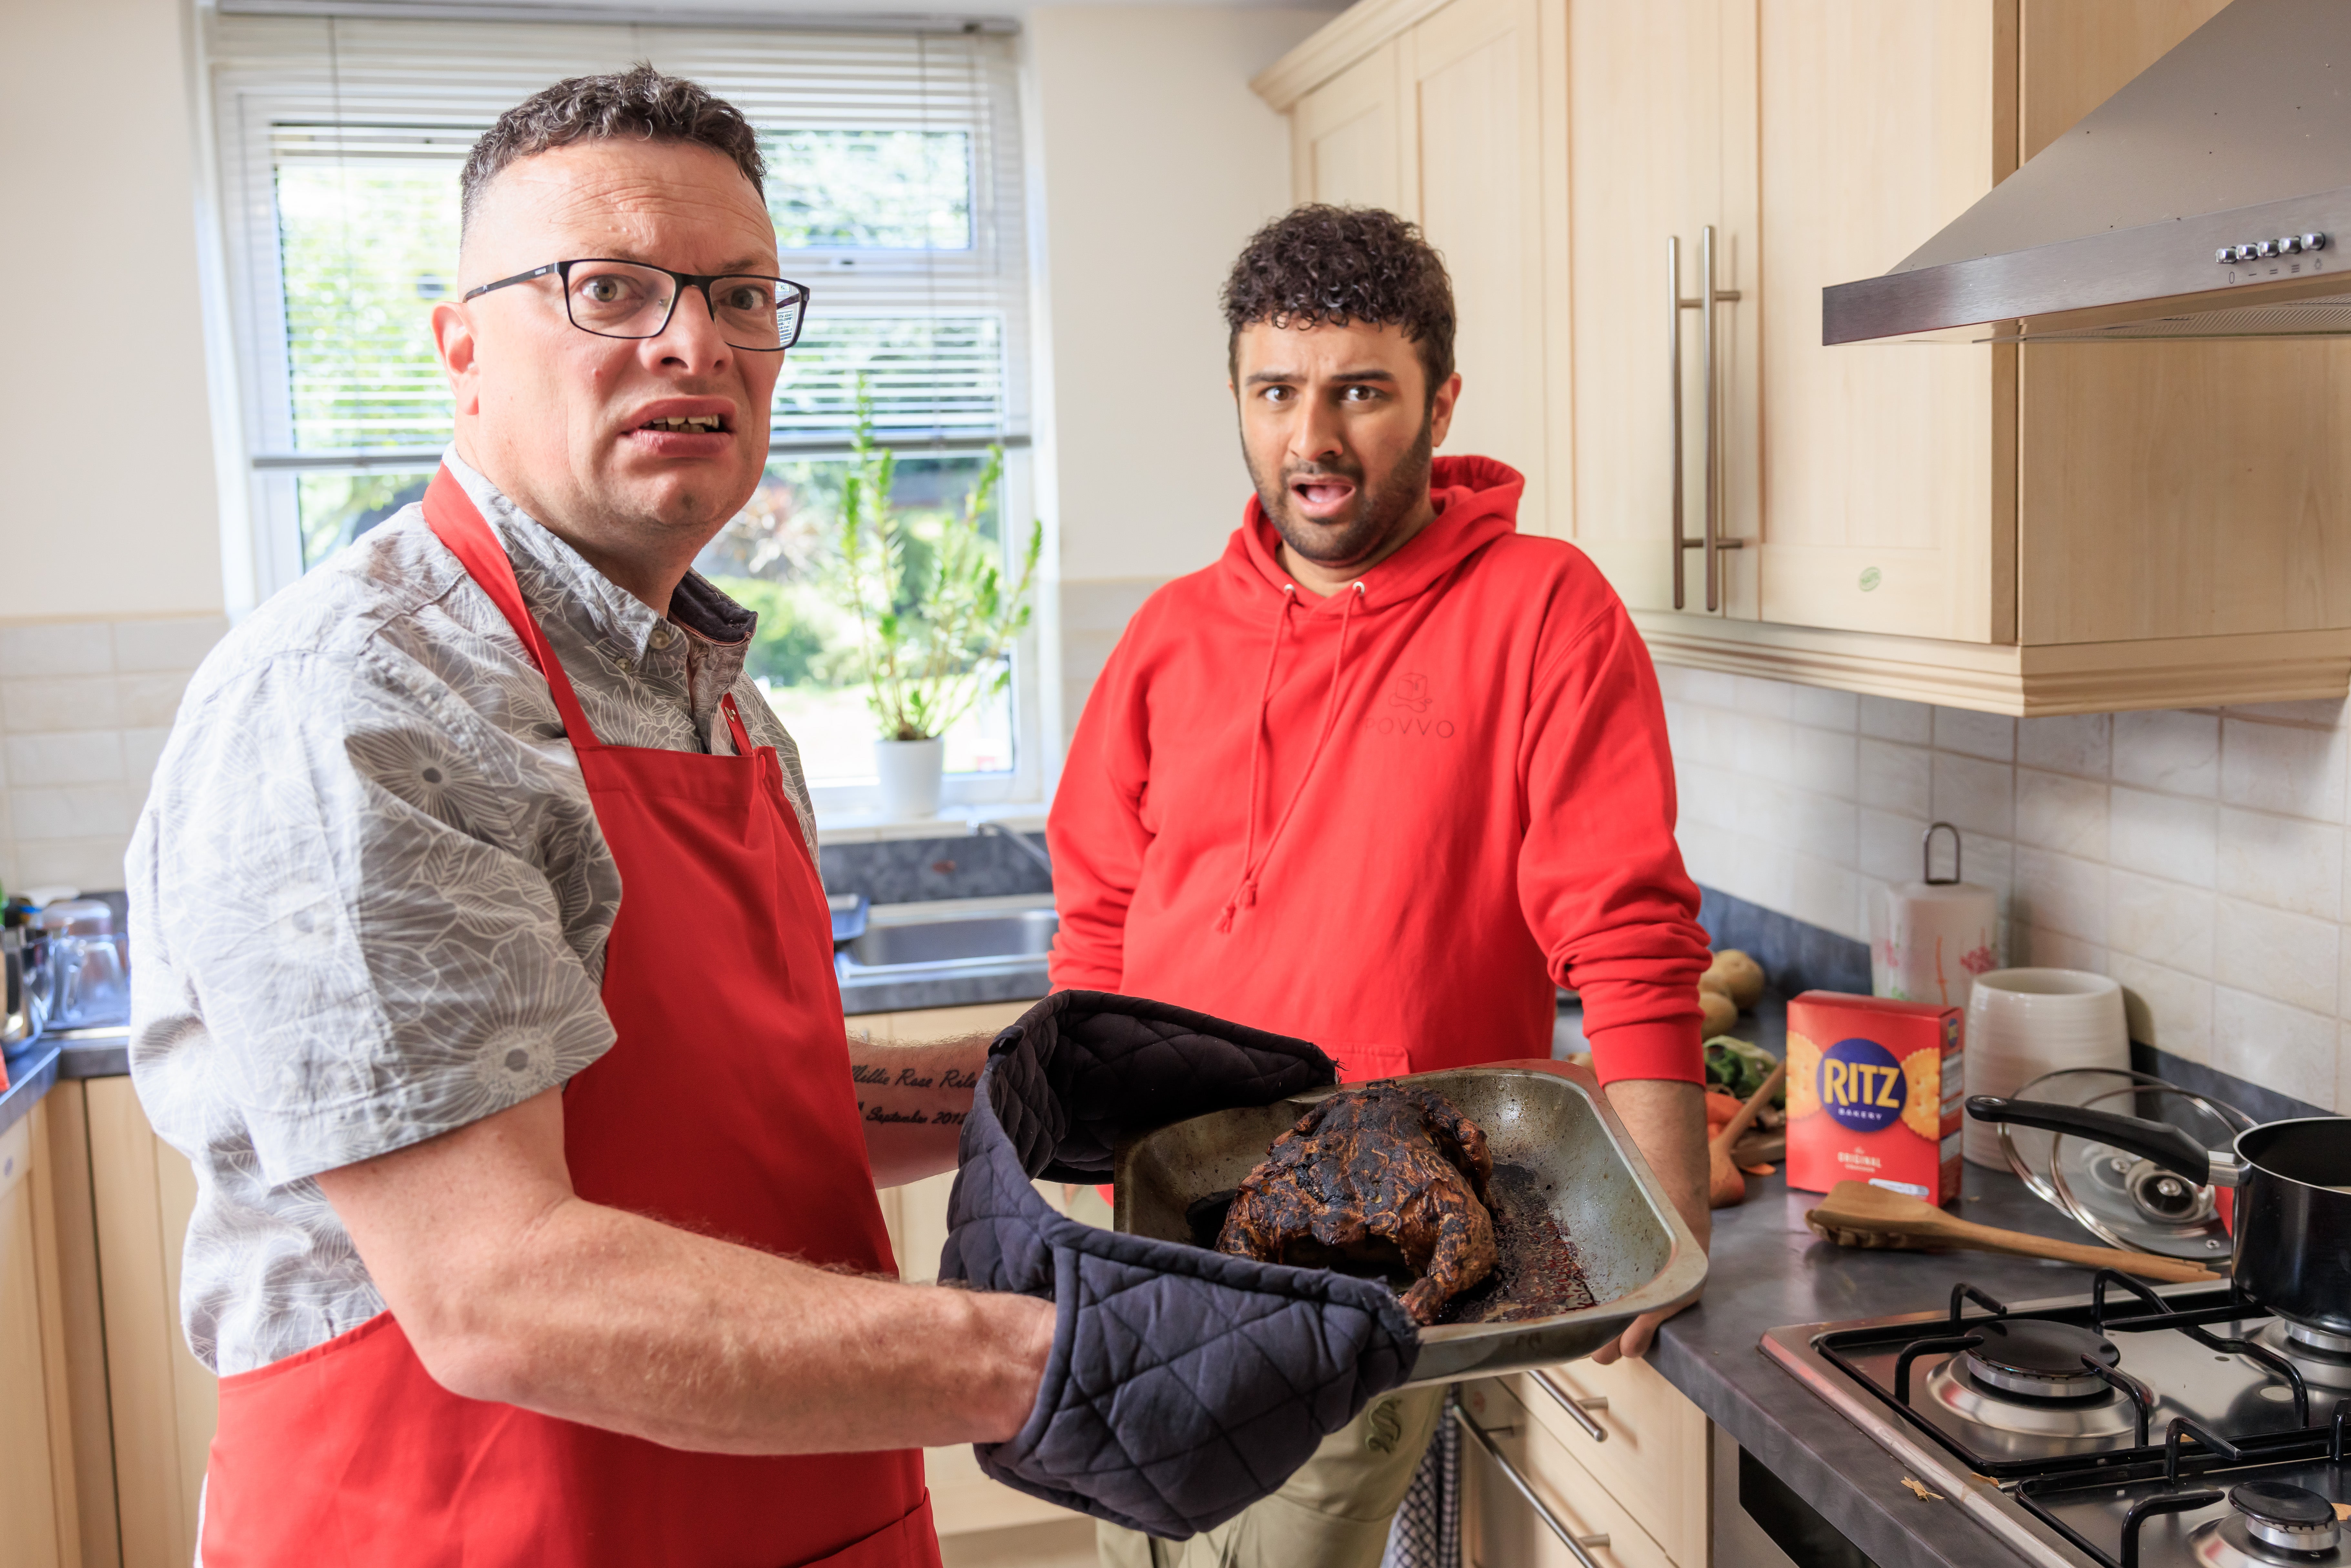 The study was commissioned by cracker brand Ritz, which has teamed up with former Come Dine With Me contestant, Kevin Riley and TikTok comedian, Shabaz Says